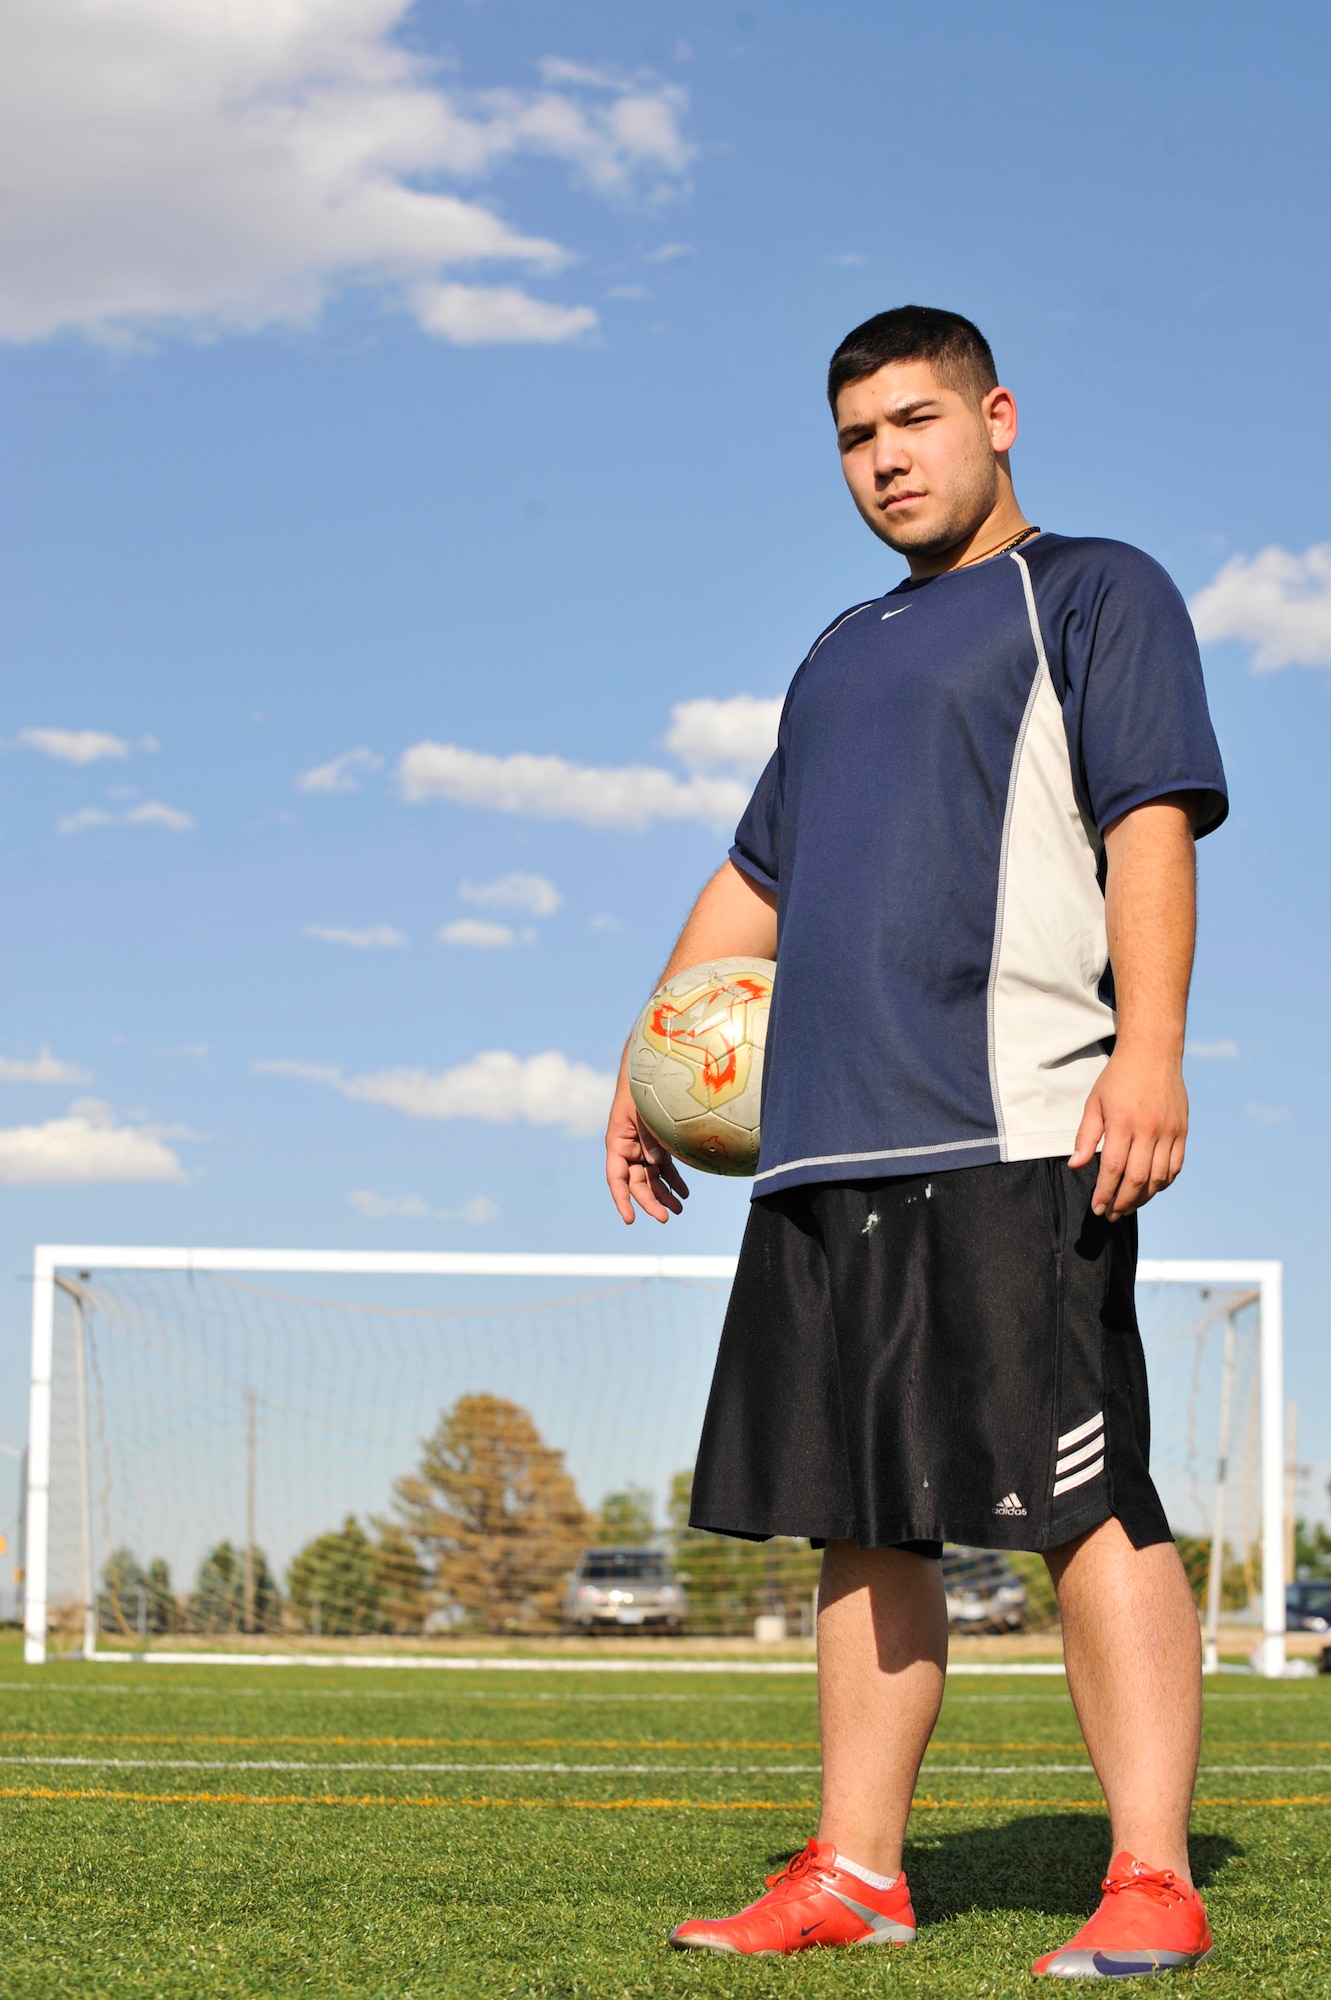 BUCKLEY AIR FORCE BASE, Colo. -- "I play soccer because it's fun and it gives me a good way to stay active," says Airman 1st Class Nolan Luna-Chavez, 460th Space Communications Squadron. Airman Luna-Chavez plays a middle field position for the 460th SCS soccer team. (U.S. Air Force photo by Airman 1st Class Paul Labbe)